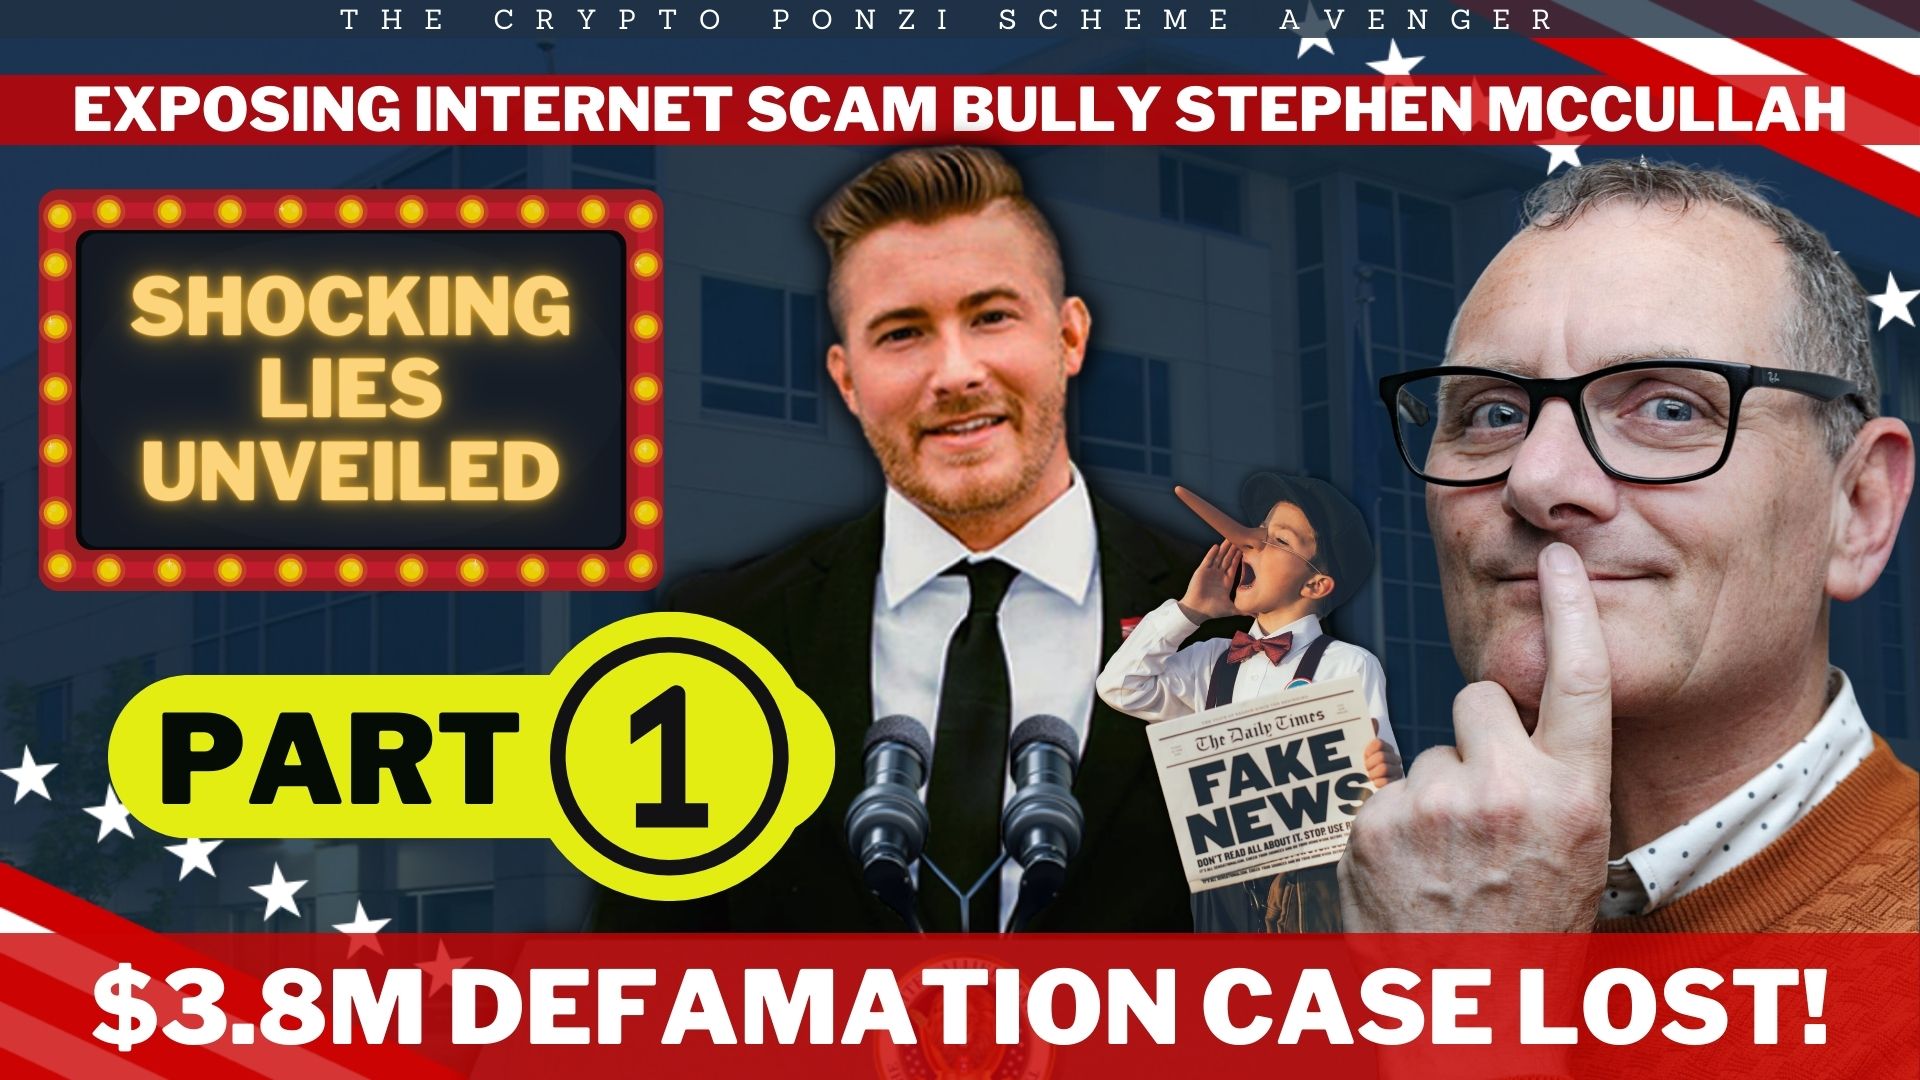 EXPOSING Internet Scam Bully STEPHEN MCCULLAH: $3.8M Defamation Case LOST! Shocking Lies UNVEILED